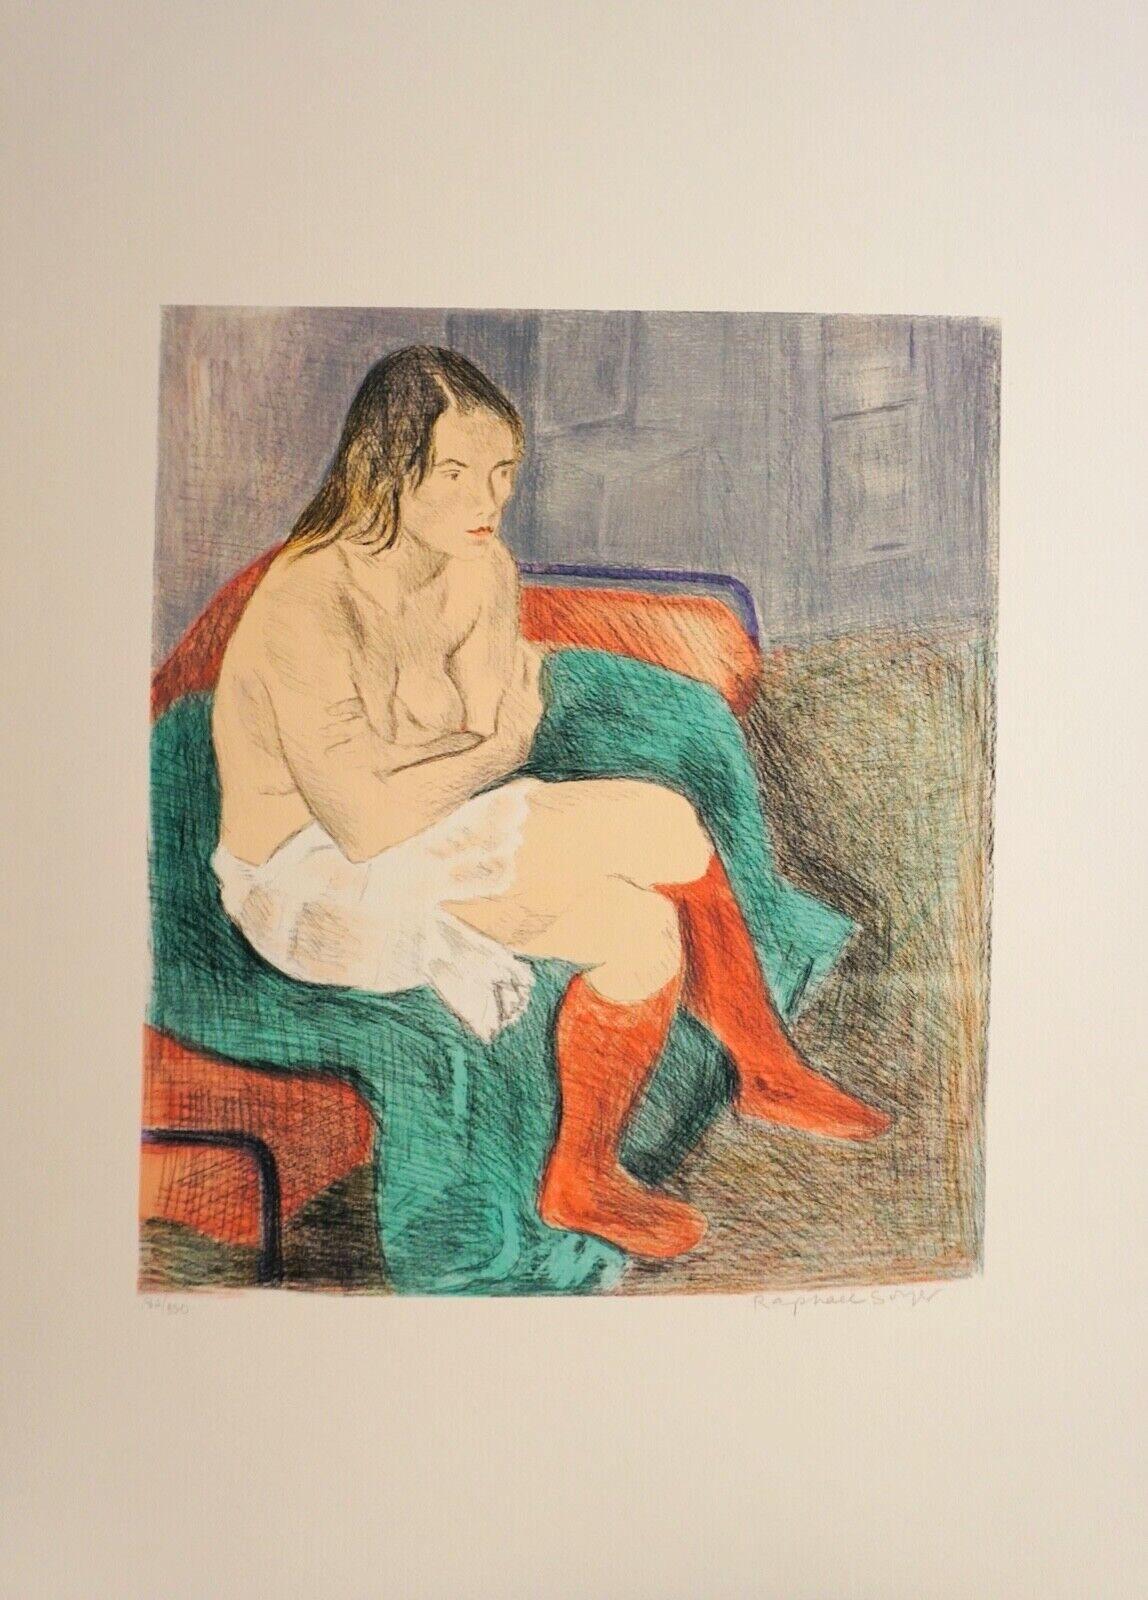 Woman in Red Stockings Portfolio (2 lithographs) - Contemporary Print by Raphael Soyer